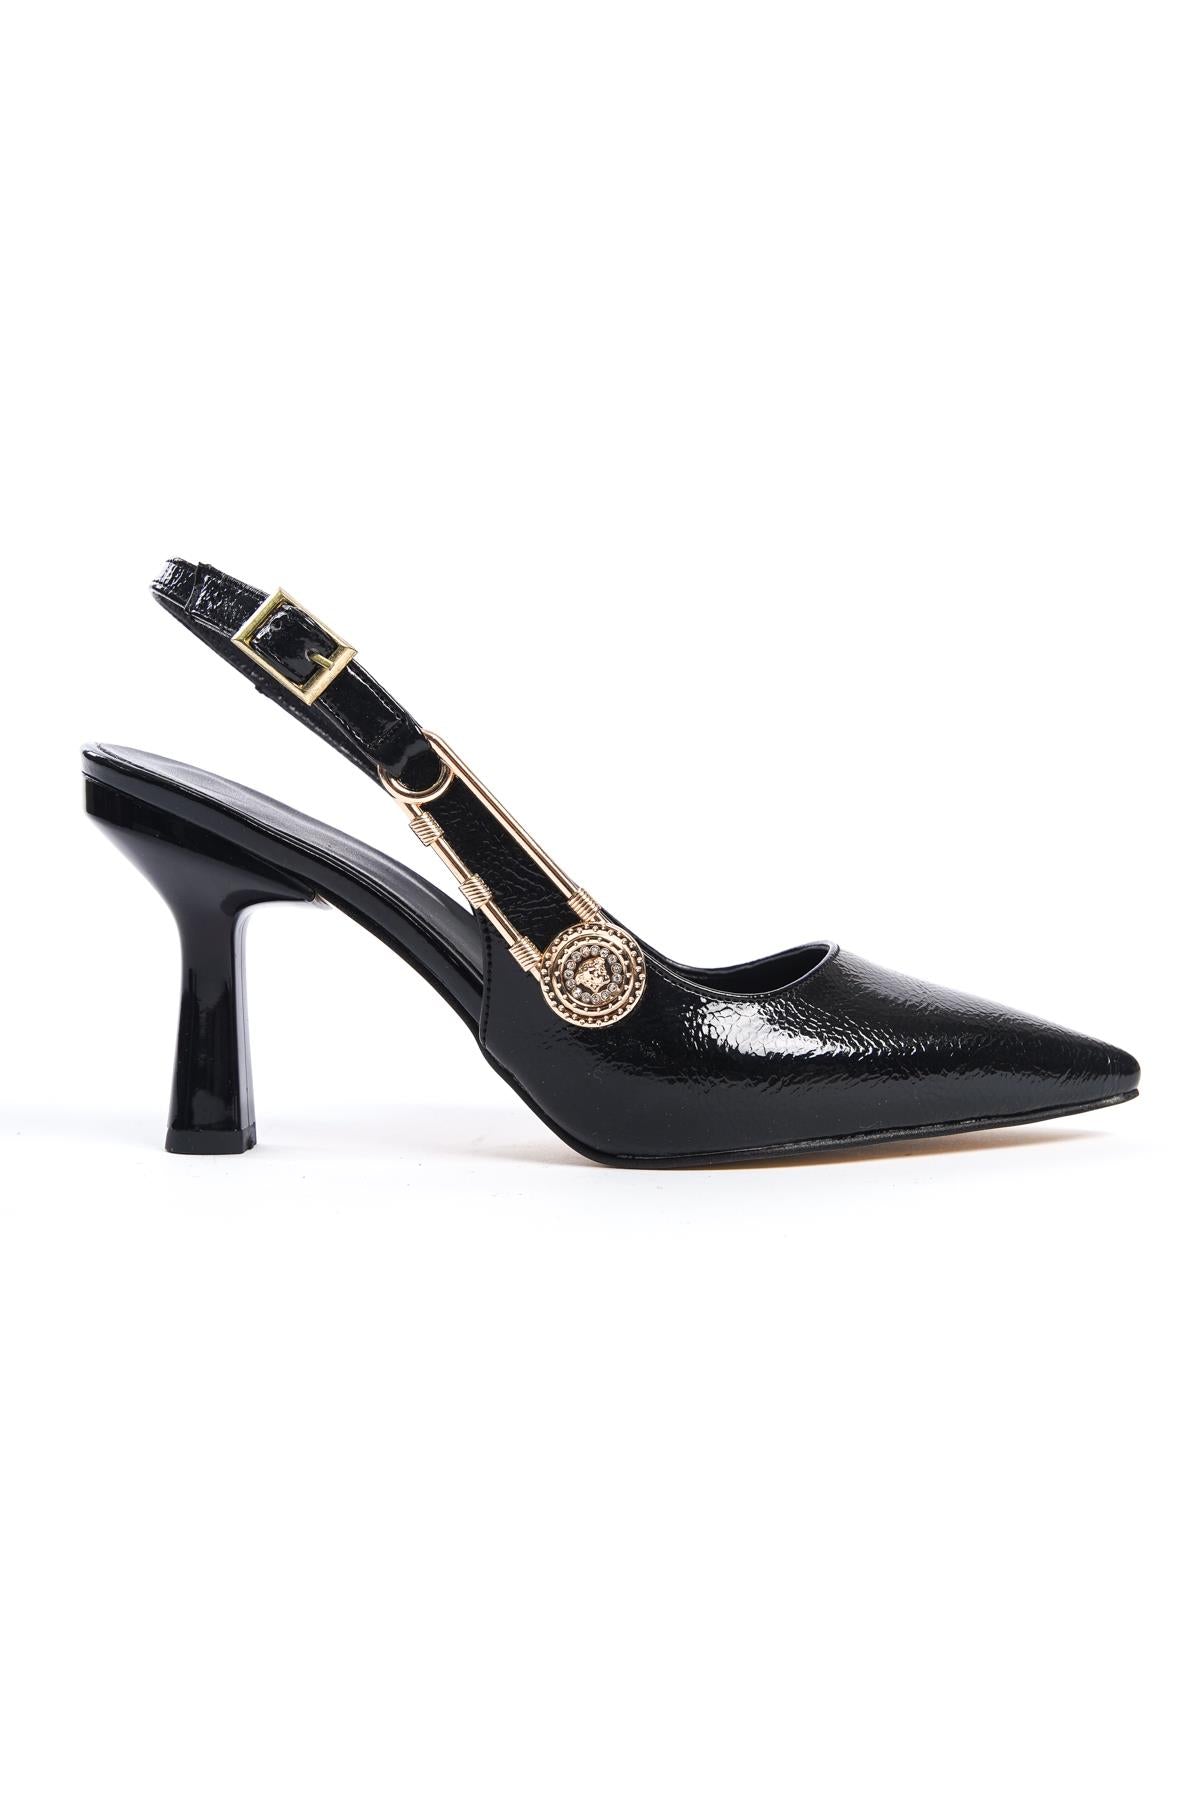 Women's Padh Black Buckle Detailed Heeled Pointed Toe Shoes - STREETMODE ™